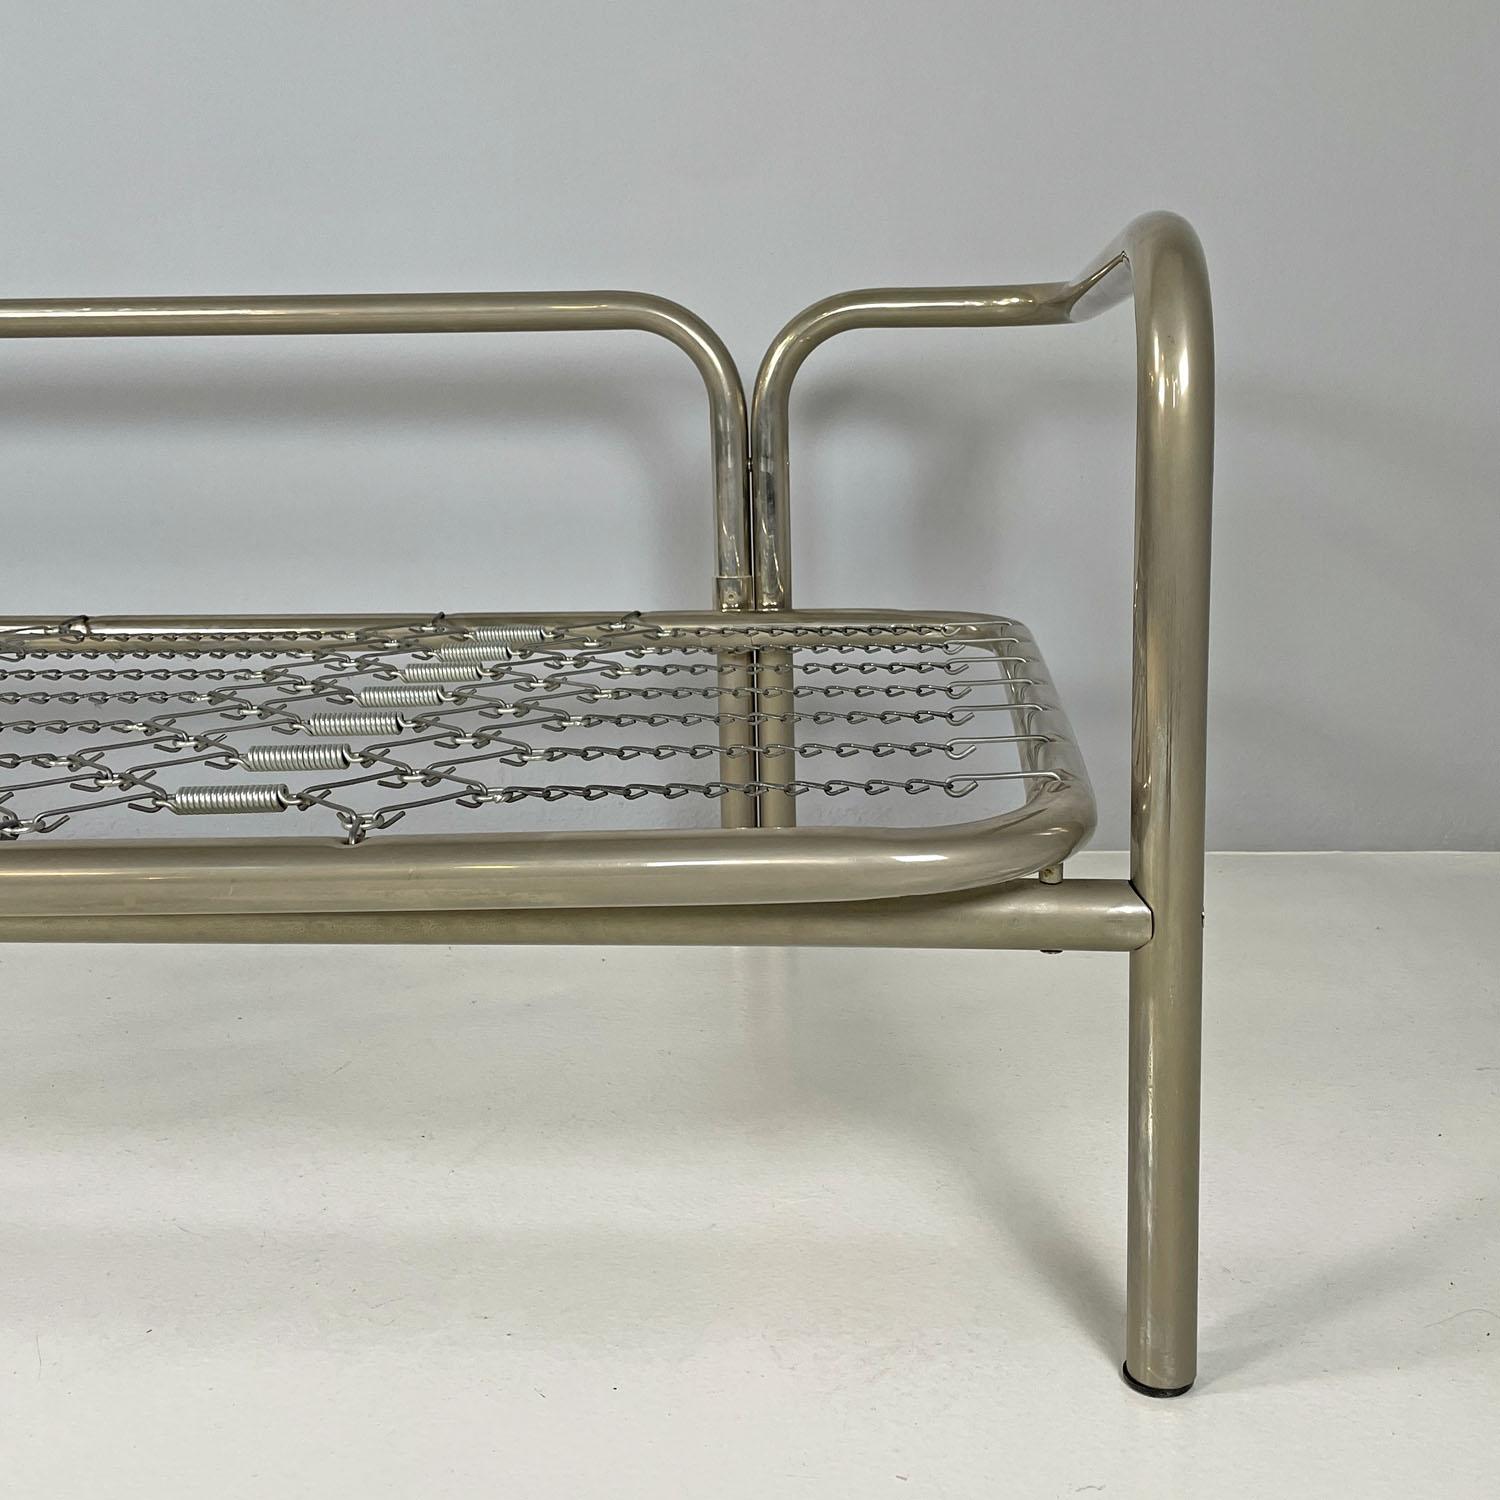 Italian modern daybed sofa Locus Solus by Gae Aulenti for Poltronova, 1970s For Sale 2